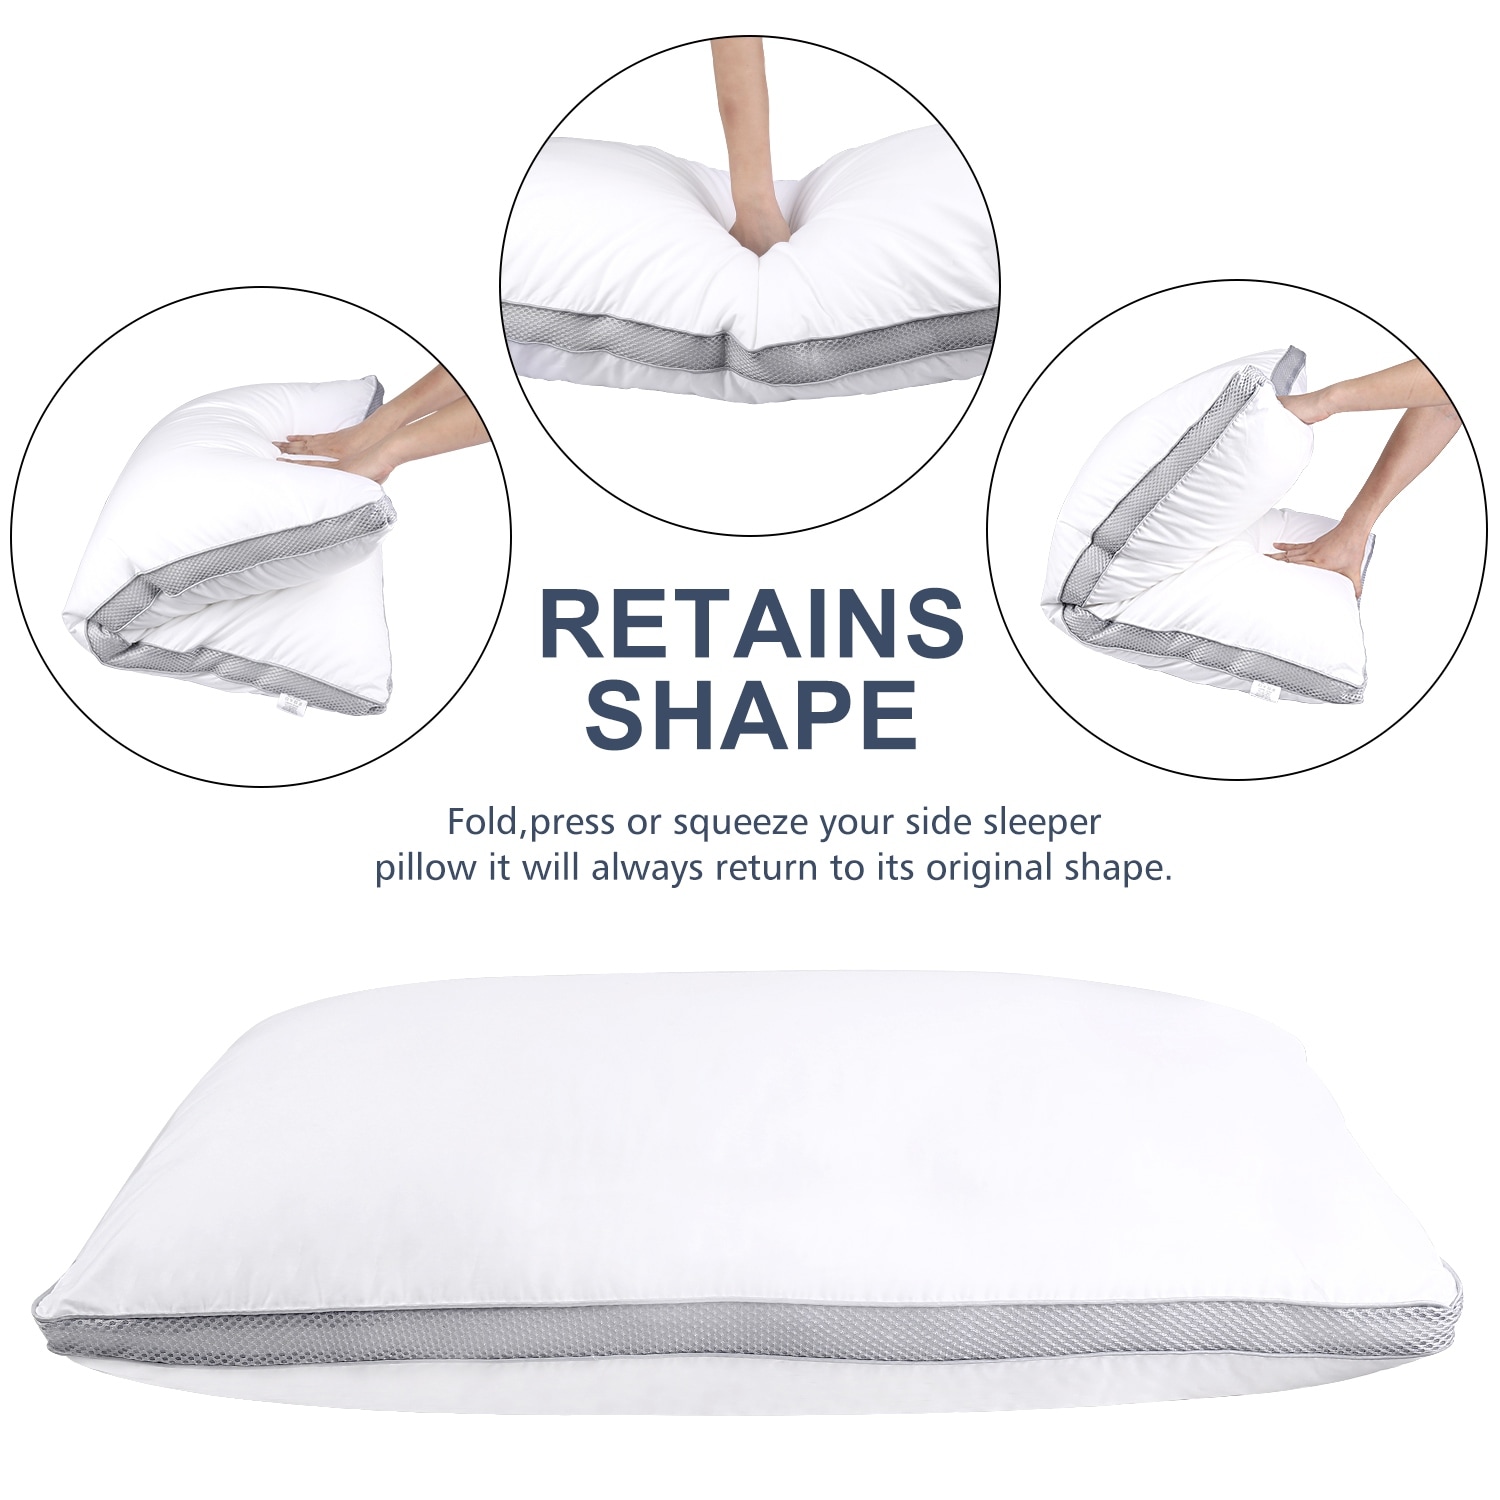 https://ak1.ostkcdn.com/images/products/is/images/direct/a0a2a5f2460646d0e27dbdd14cfd714b988046b1/2-Pack-Cotton-Pillows-Gusseted-Pillows-for-Side%2C-Stomach-and-Back-Sleeper.jpg